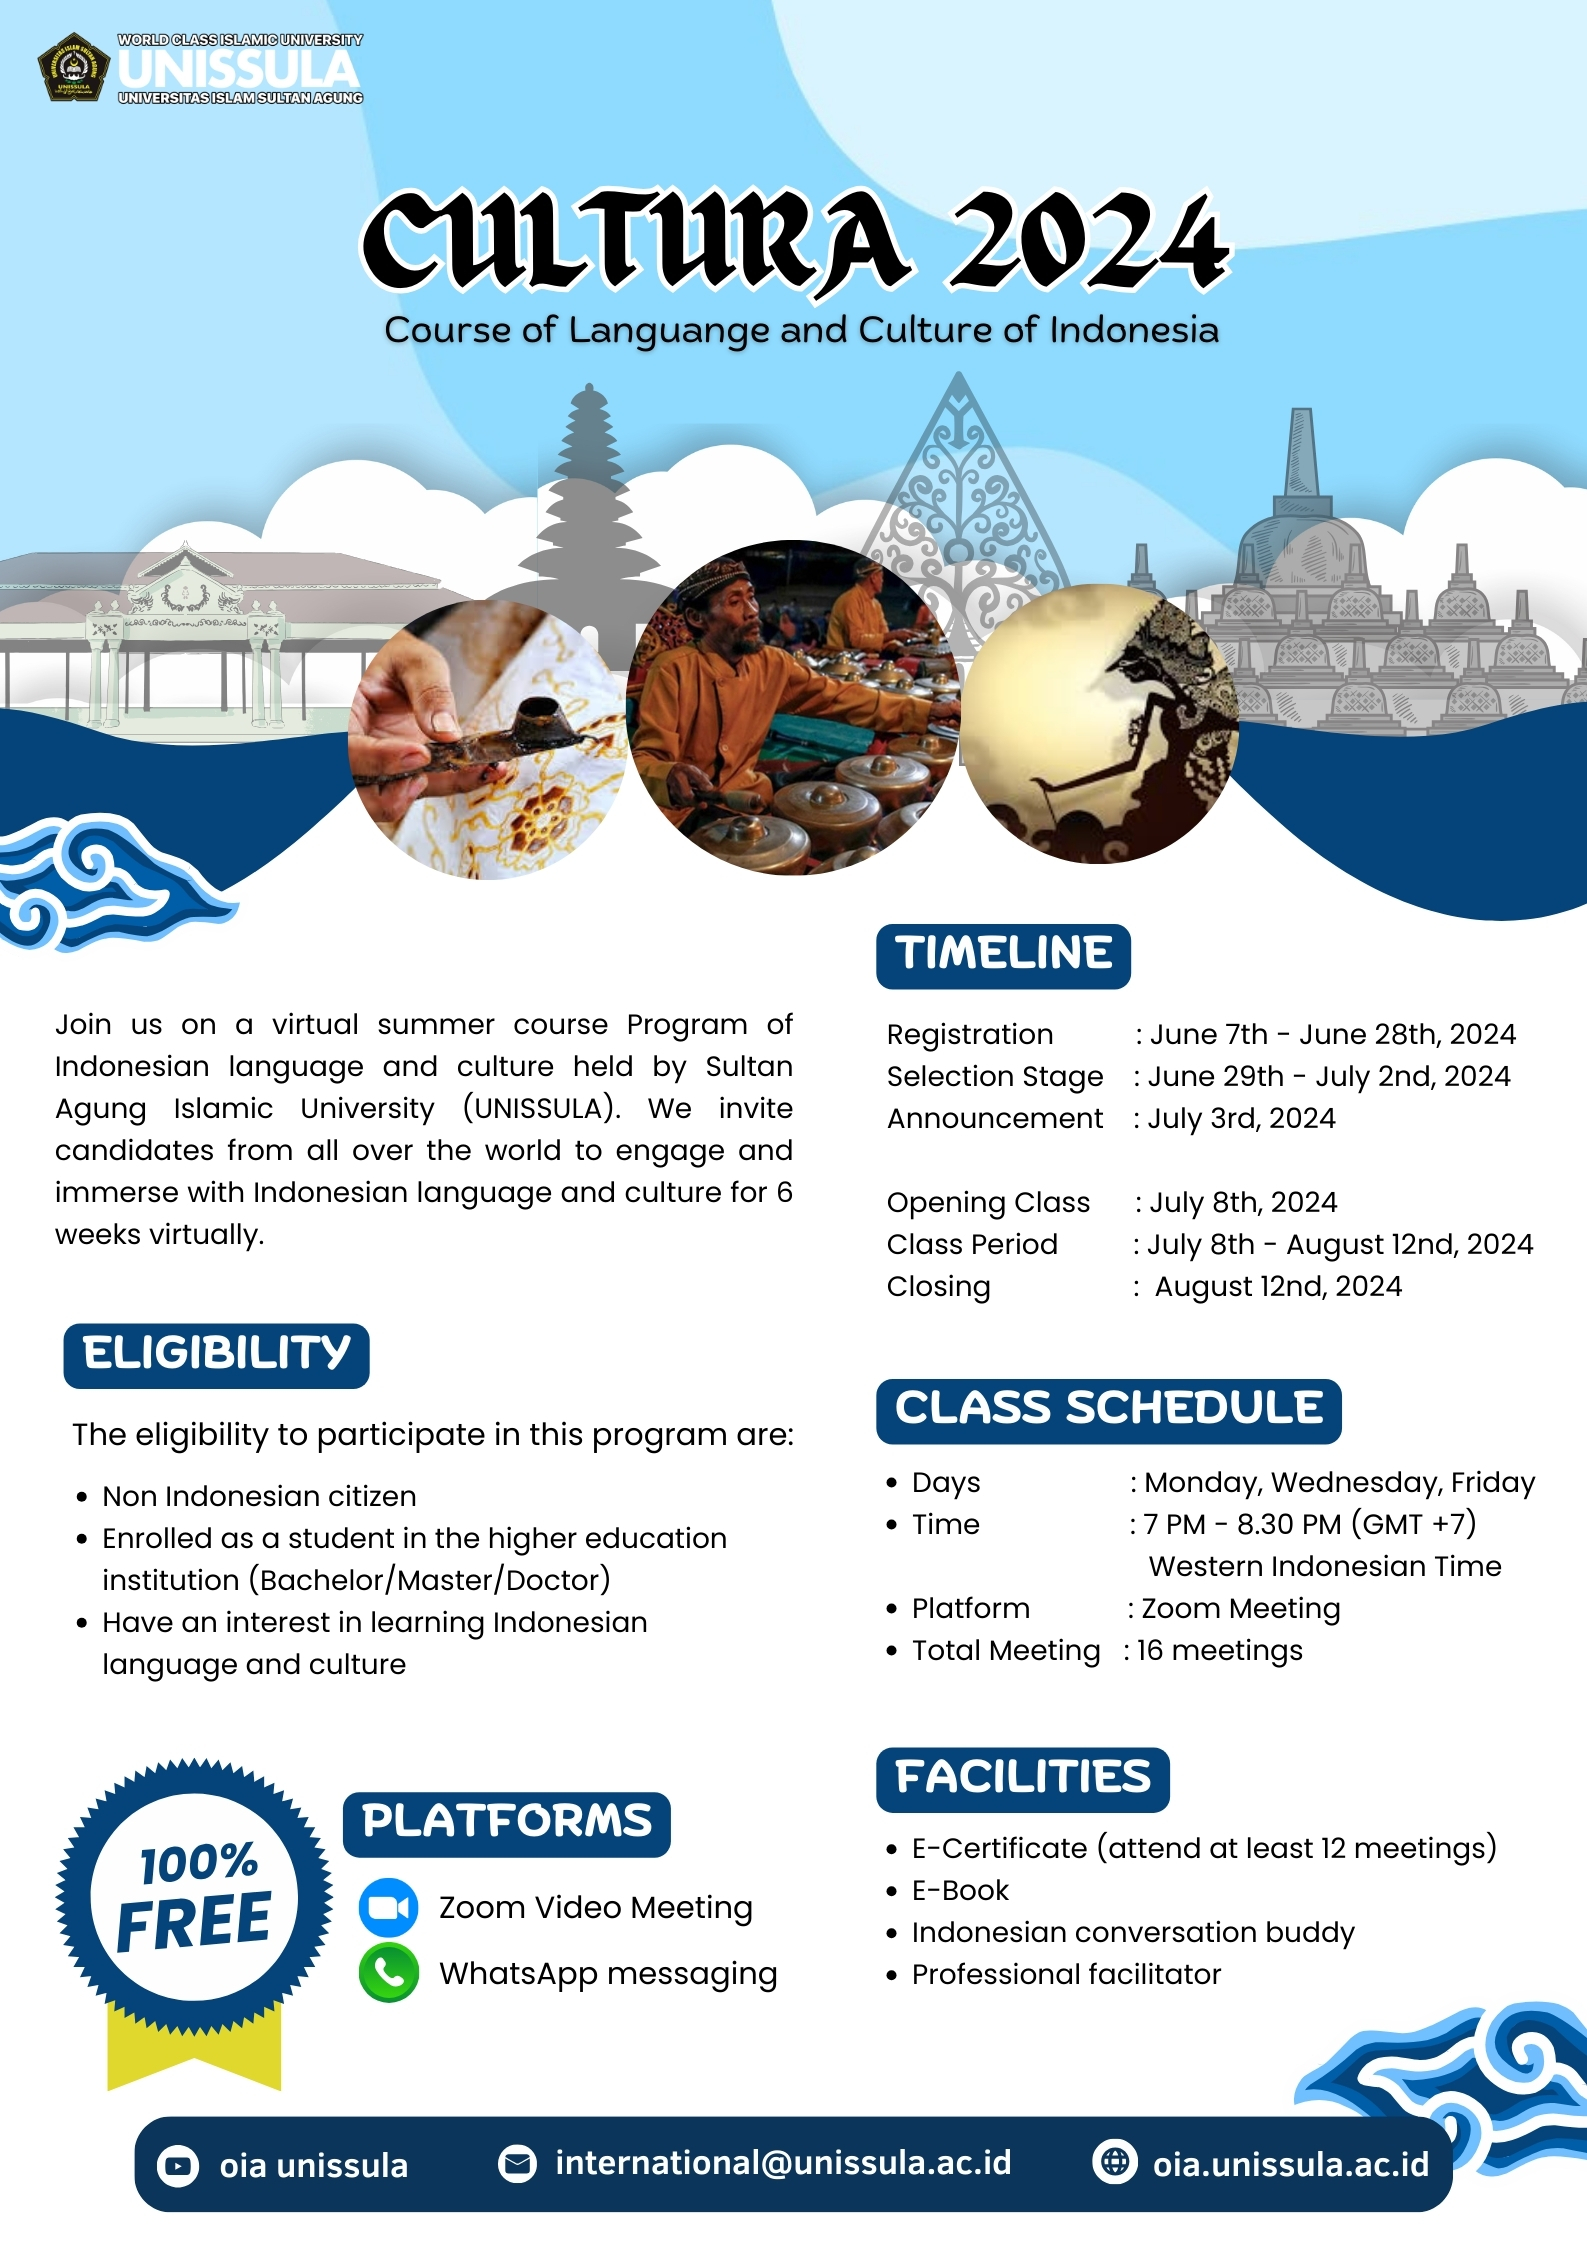 Invitation to Join the 3rd Course of Language and Culture of Indonesia (CULTURA) 2024